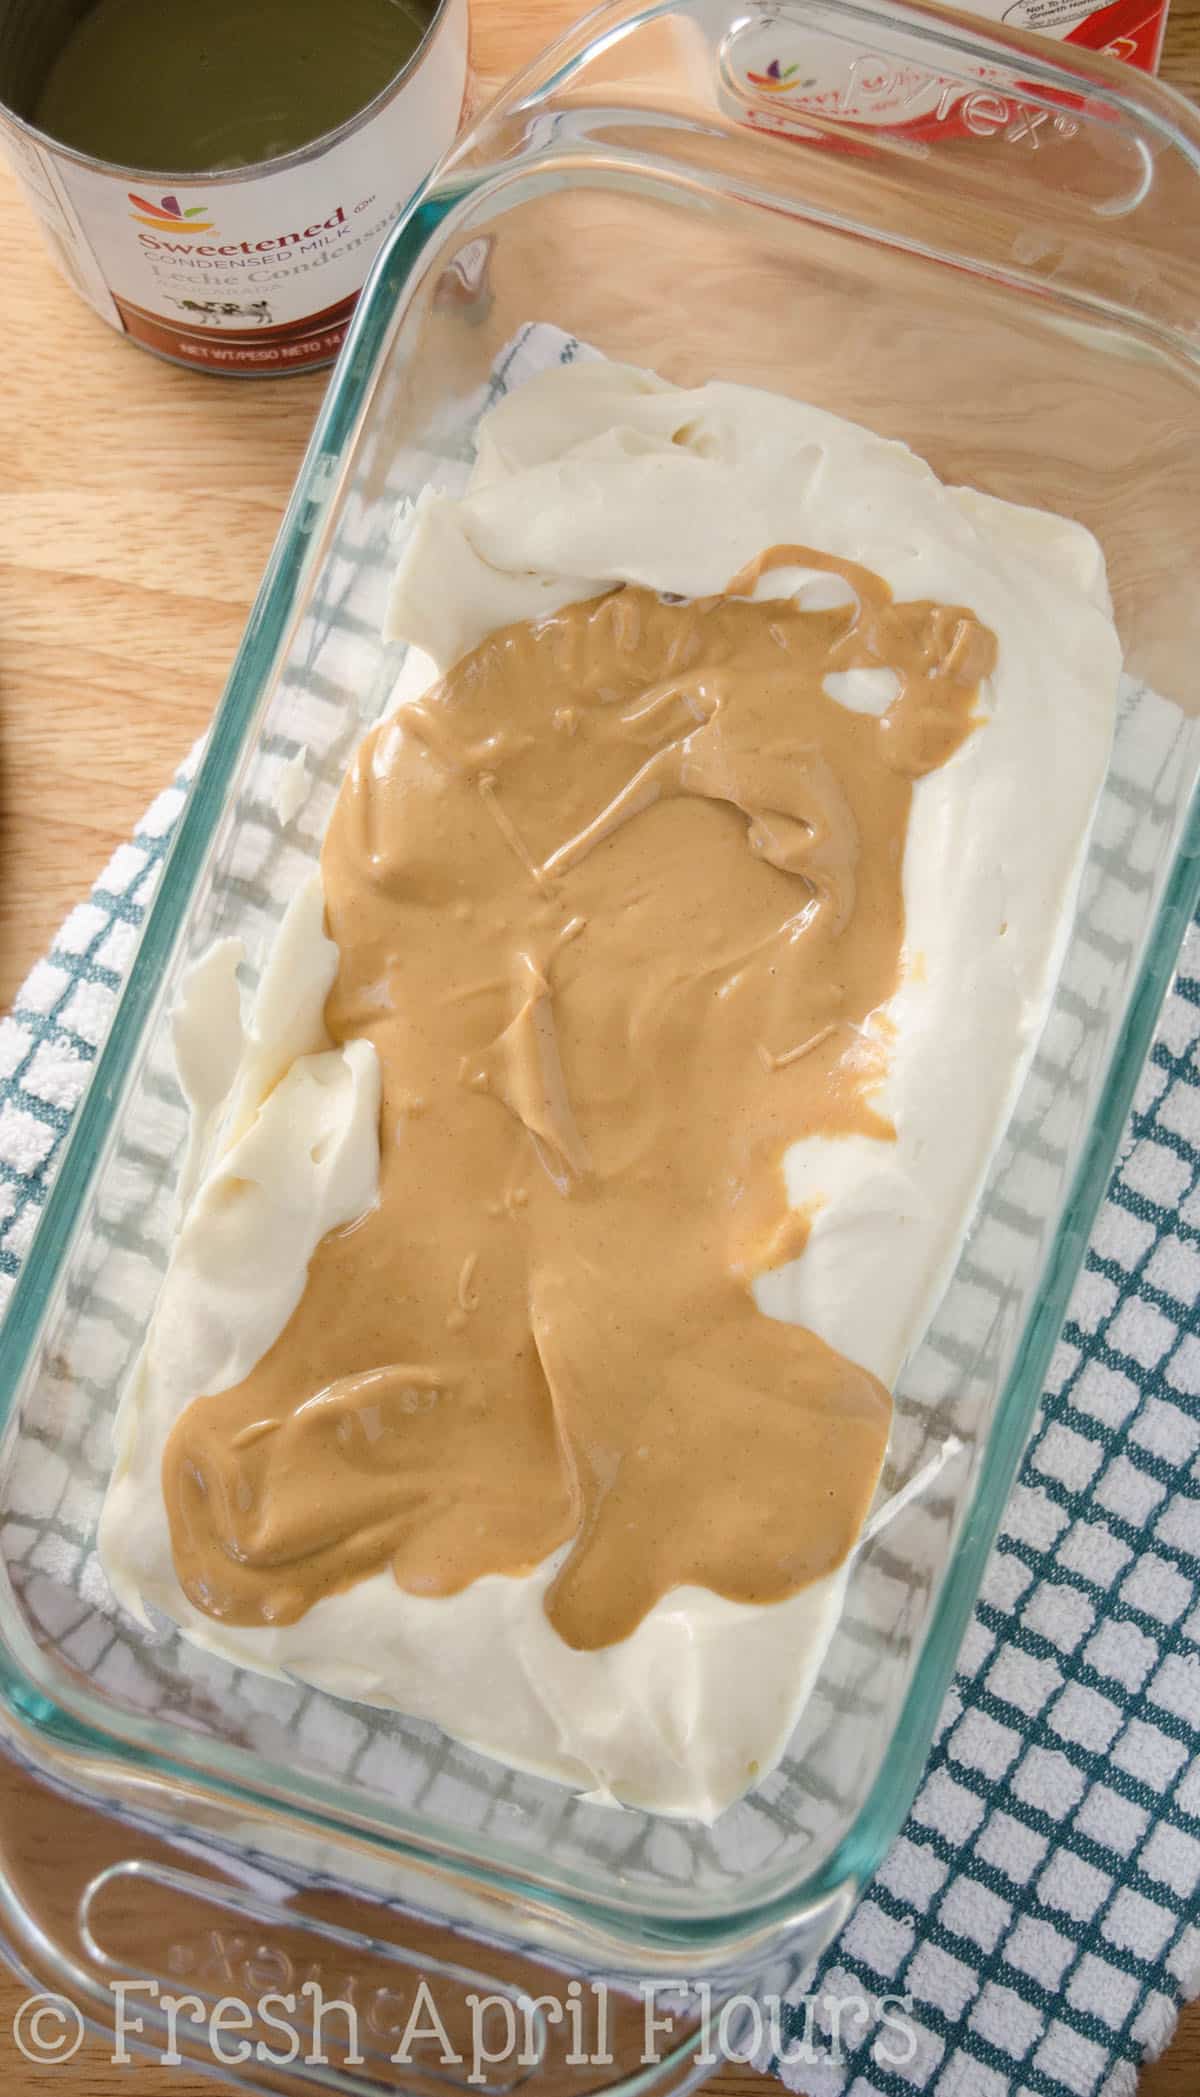 A layer of peanut butter ripple on top of no churn ice cream in a glass dish.